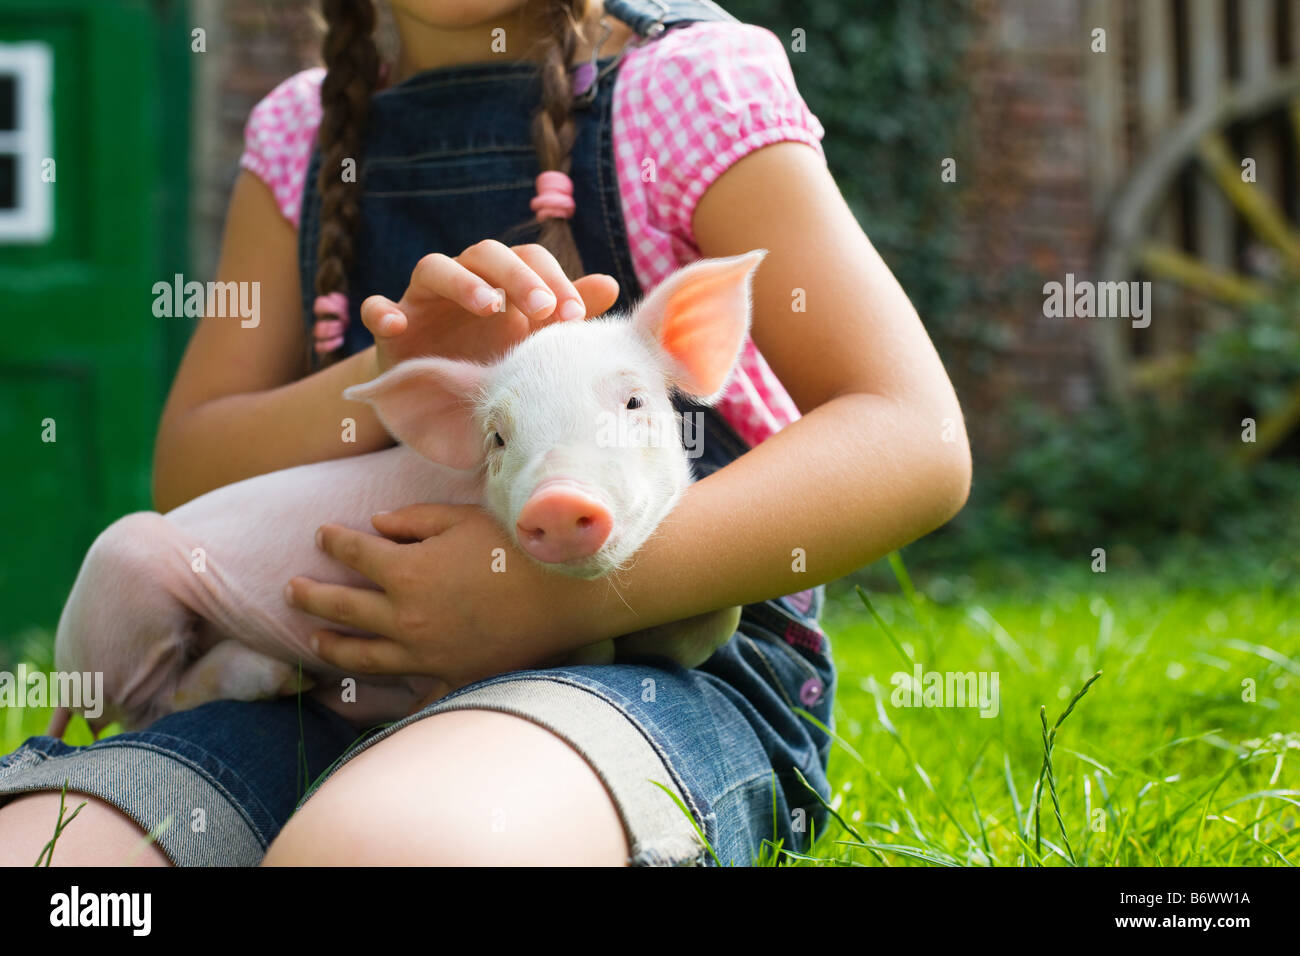 A girl holding a piglet Stock Photo